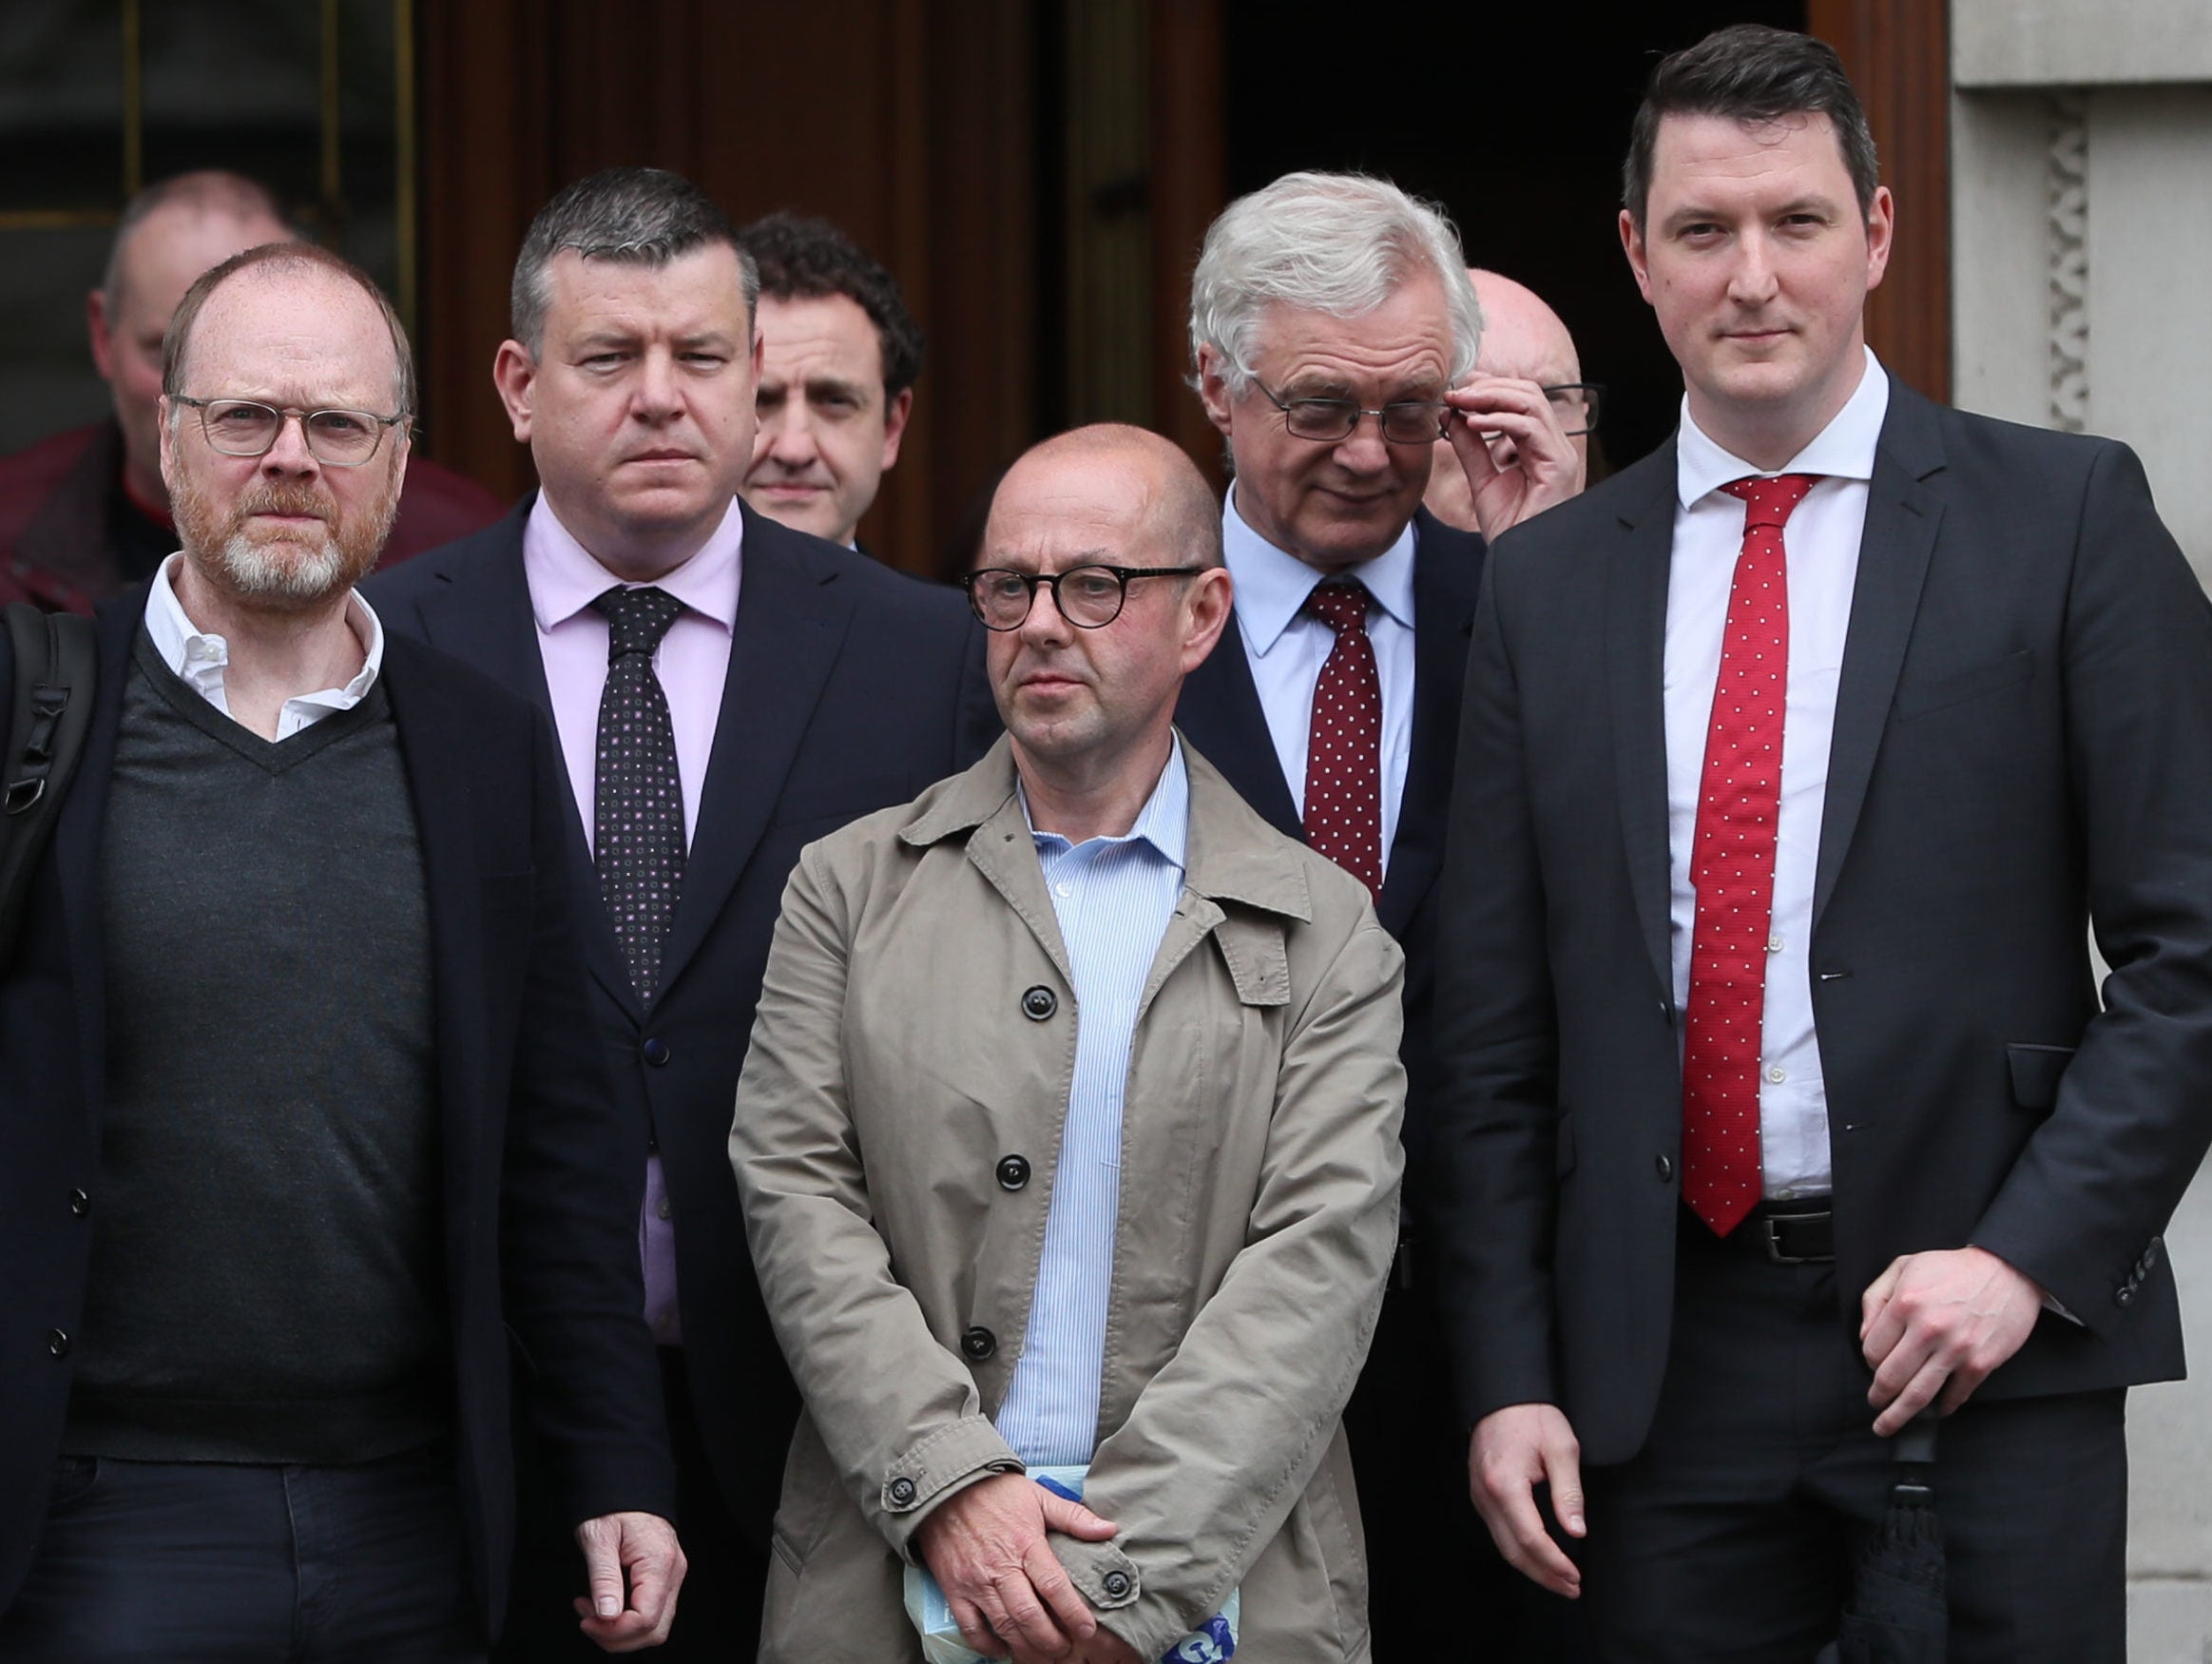 Belfast journalists behaved in 'perfectly proper manner' in protecting sources, says top judge